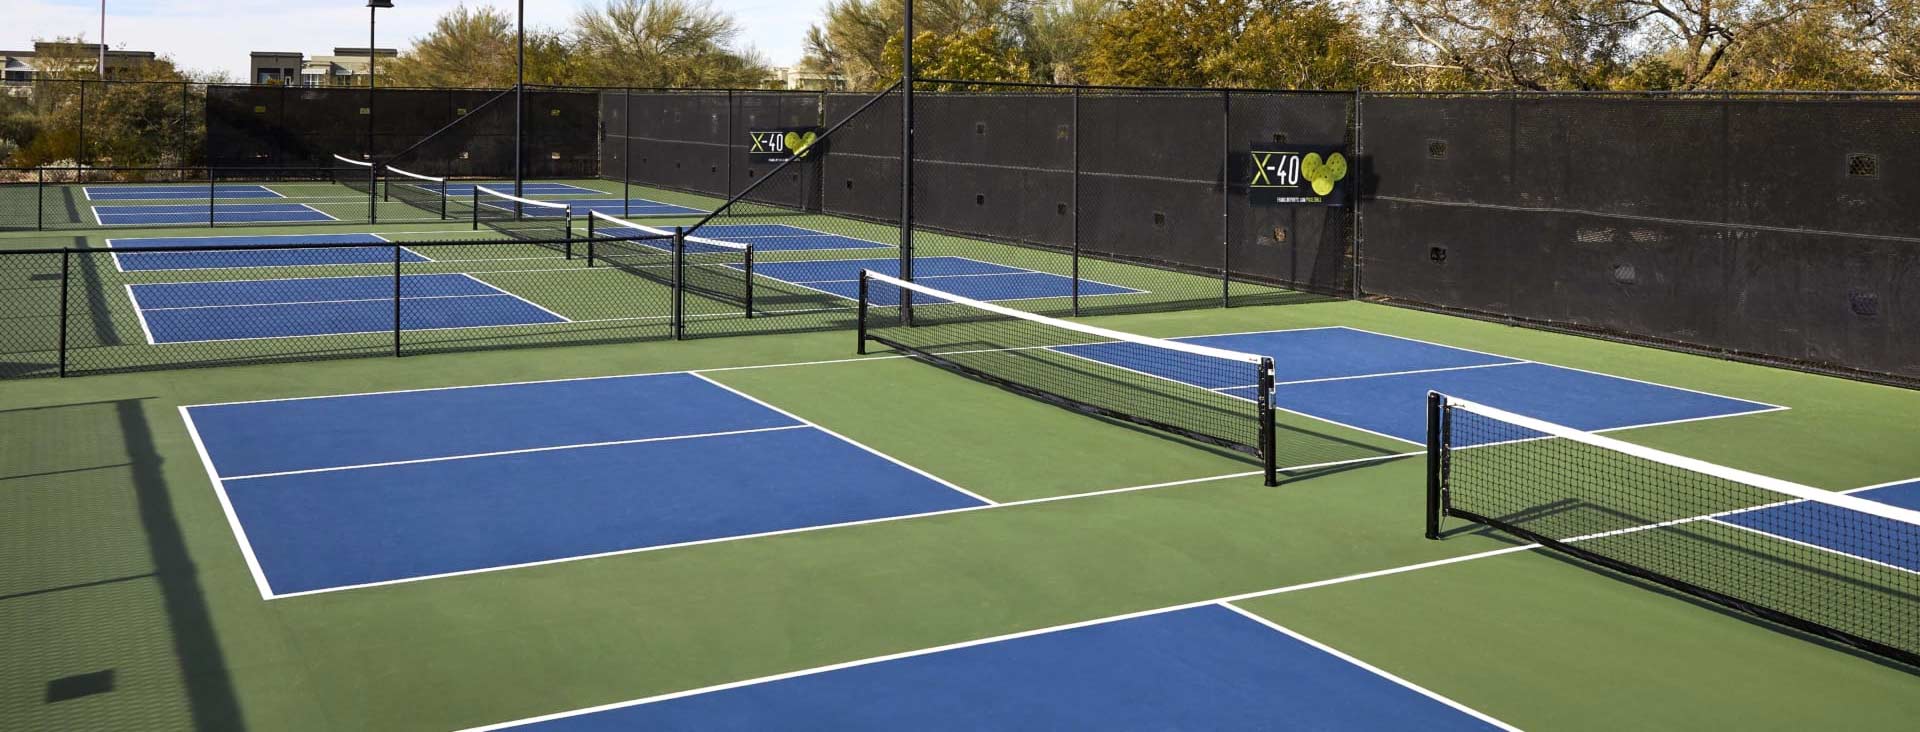 How to Play Pickleball on a Tennis Court 